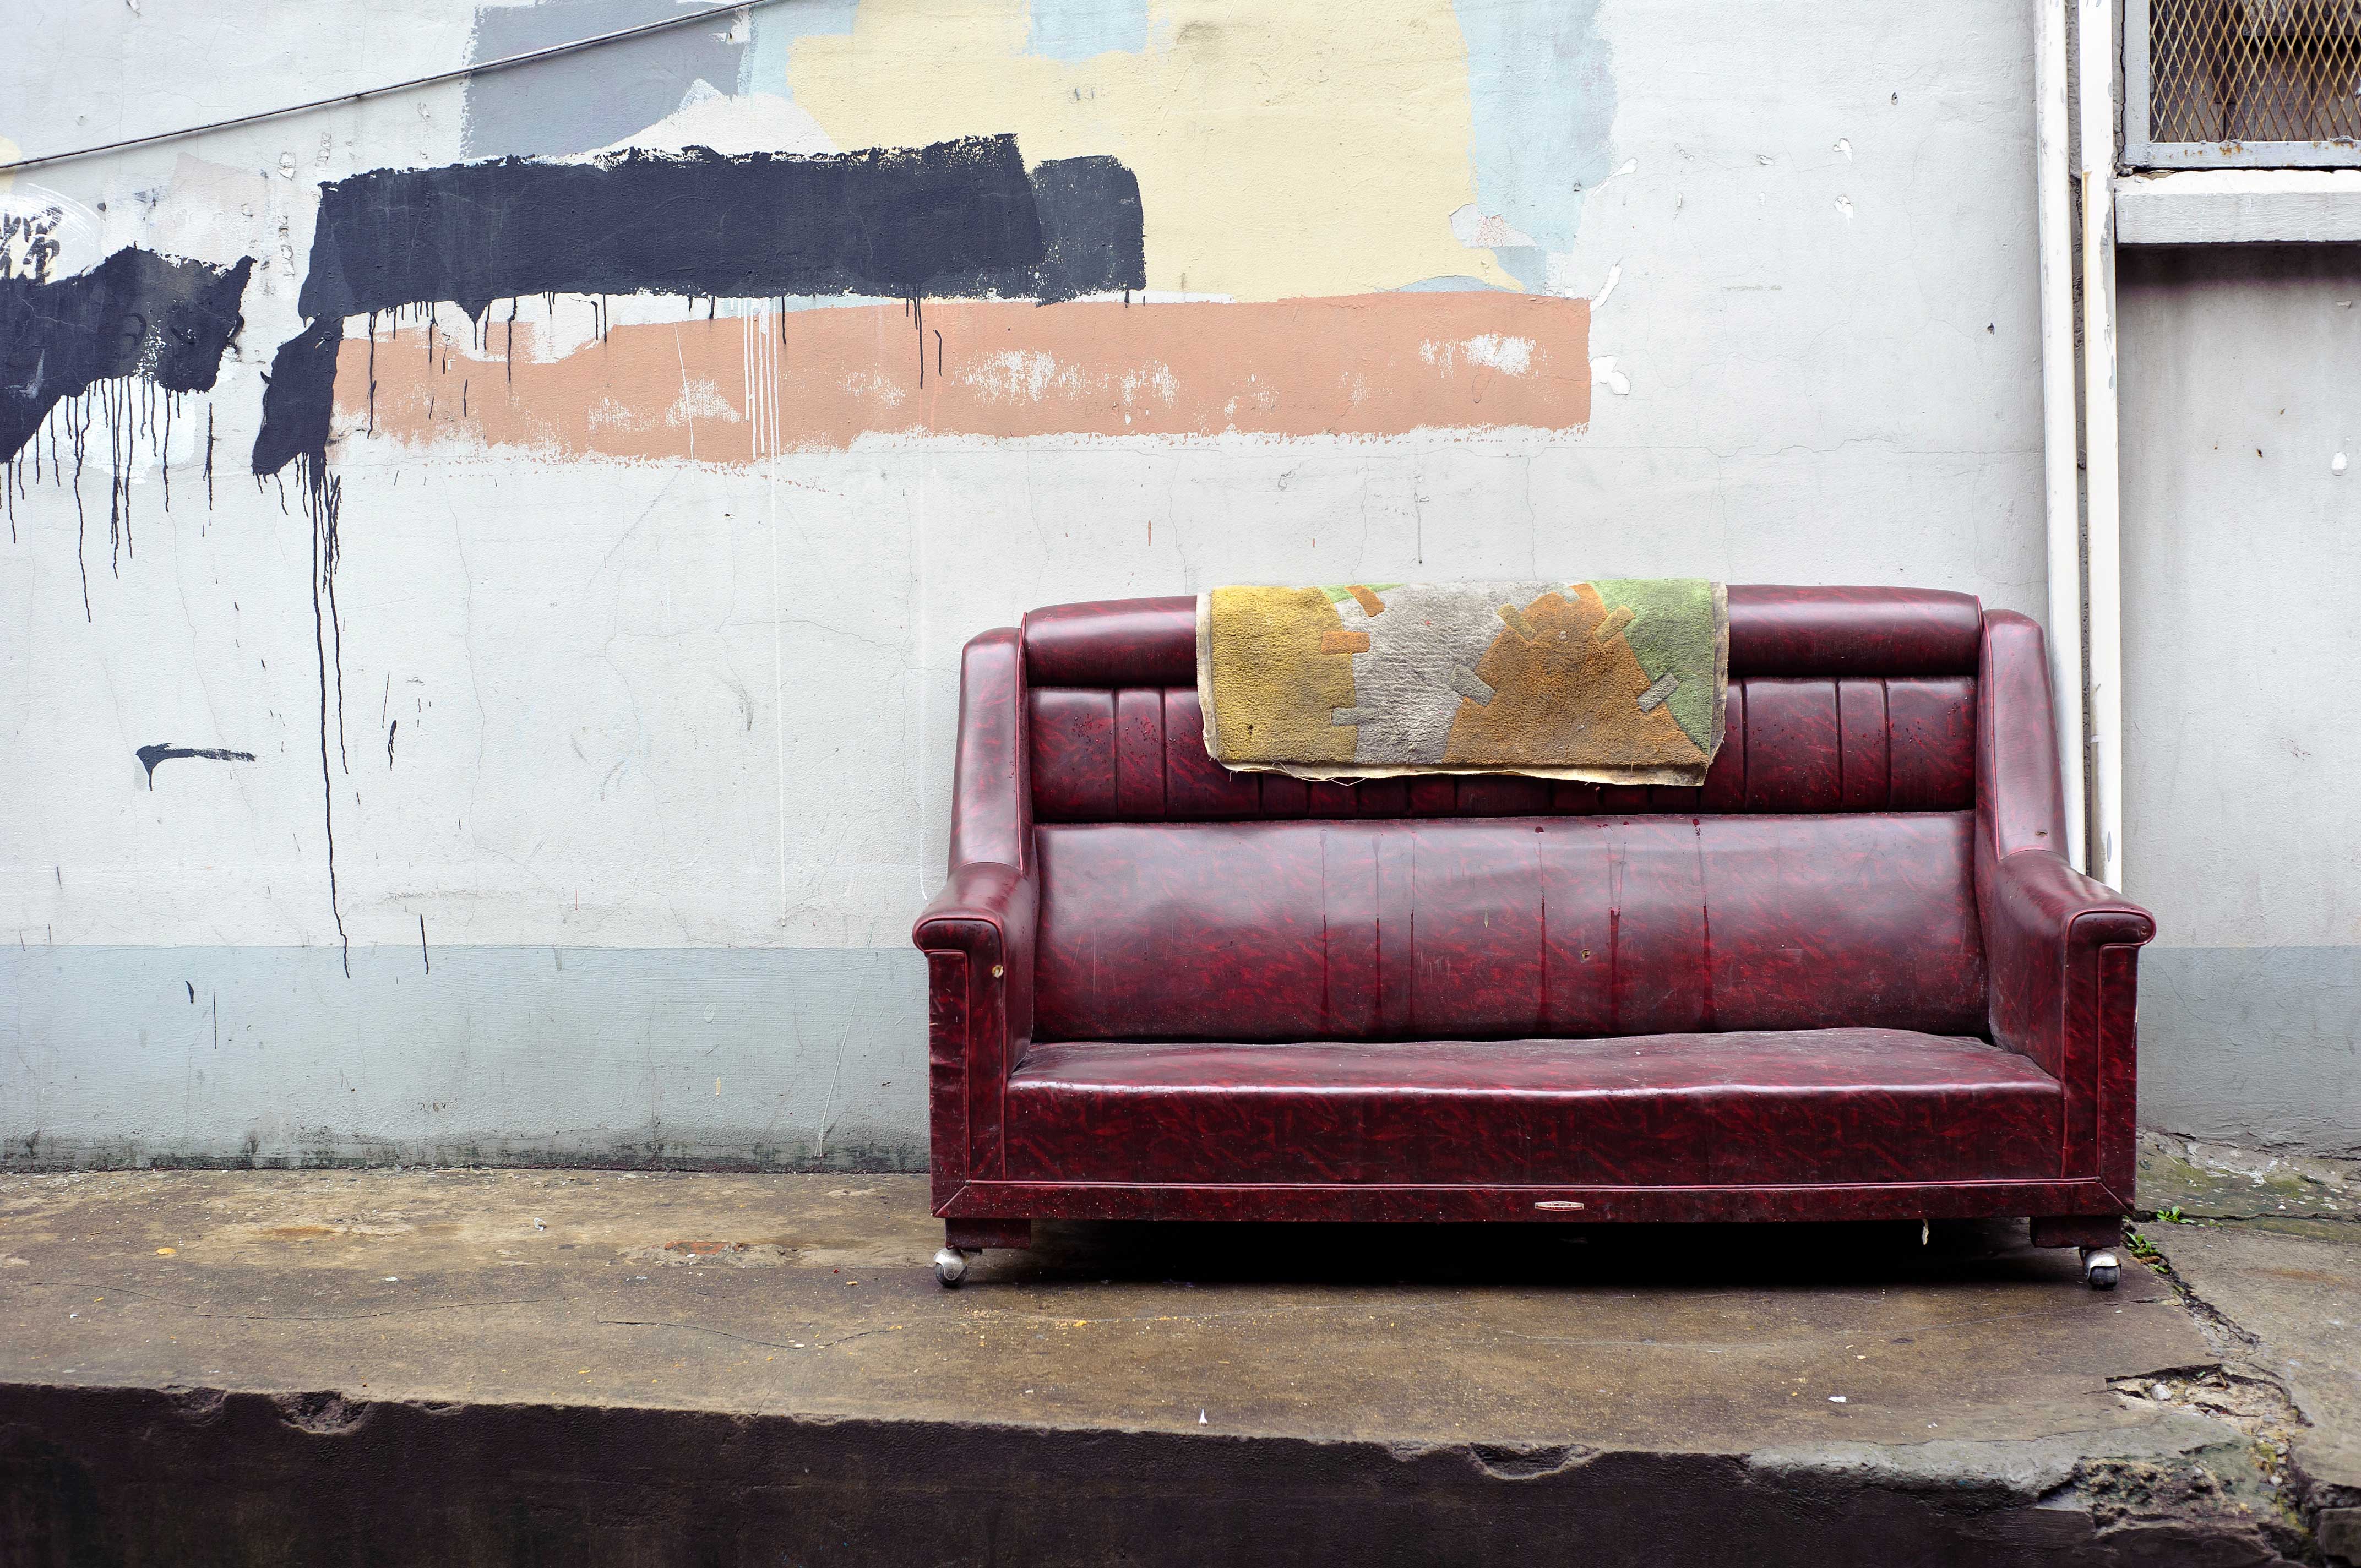 22m pieces of furniture thrown out every year in the UK | Resource Magazine